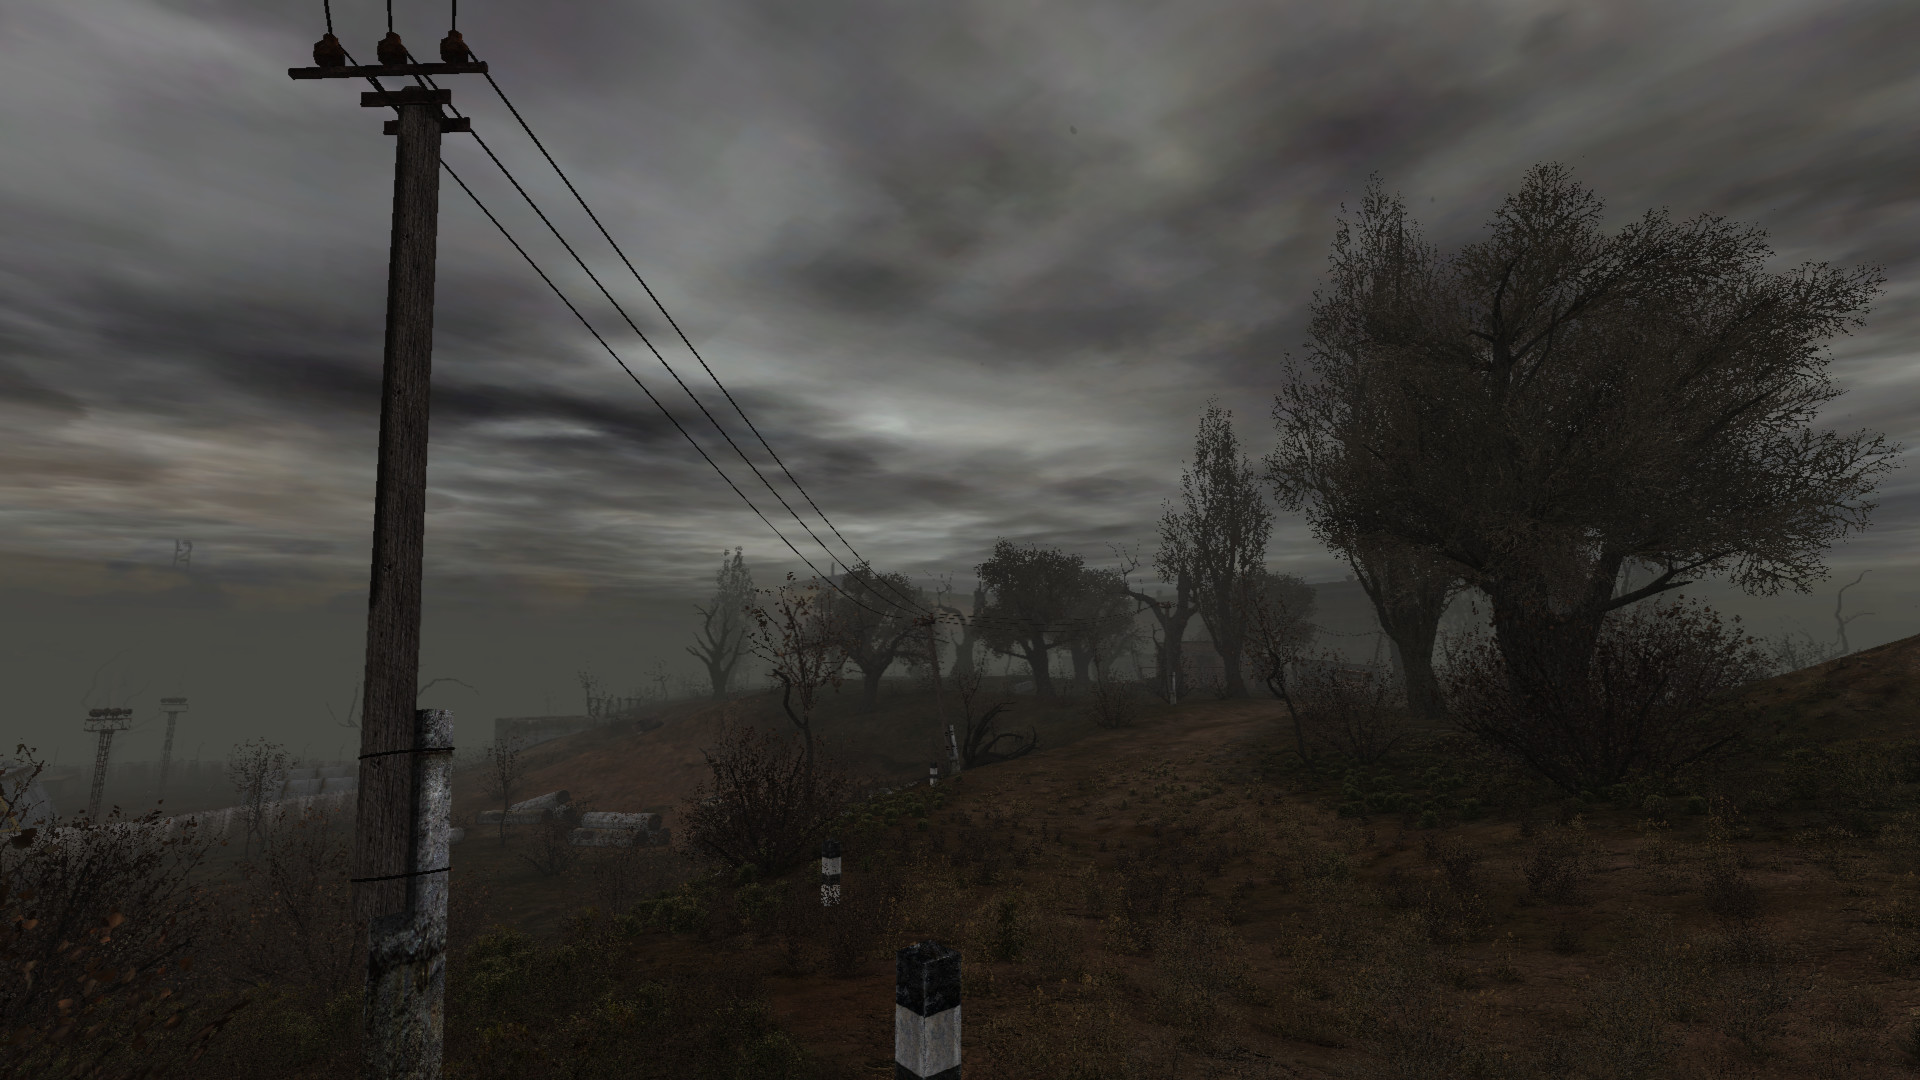 1920x1080 Atmosphere of Yantar zone (S.T.A.L.K.E.R. Shadow of Chernobyl with STALKER  Complete 2009 + SC Realistic Weapons add-on 0.8)